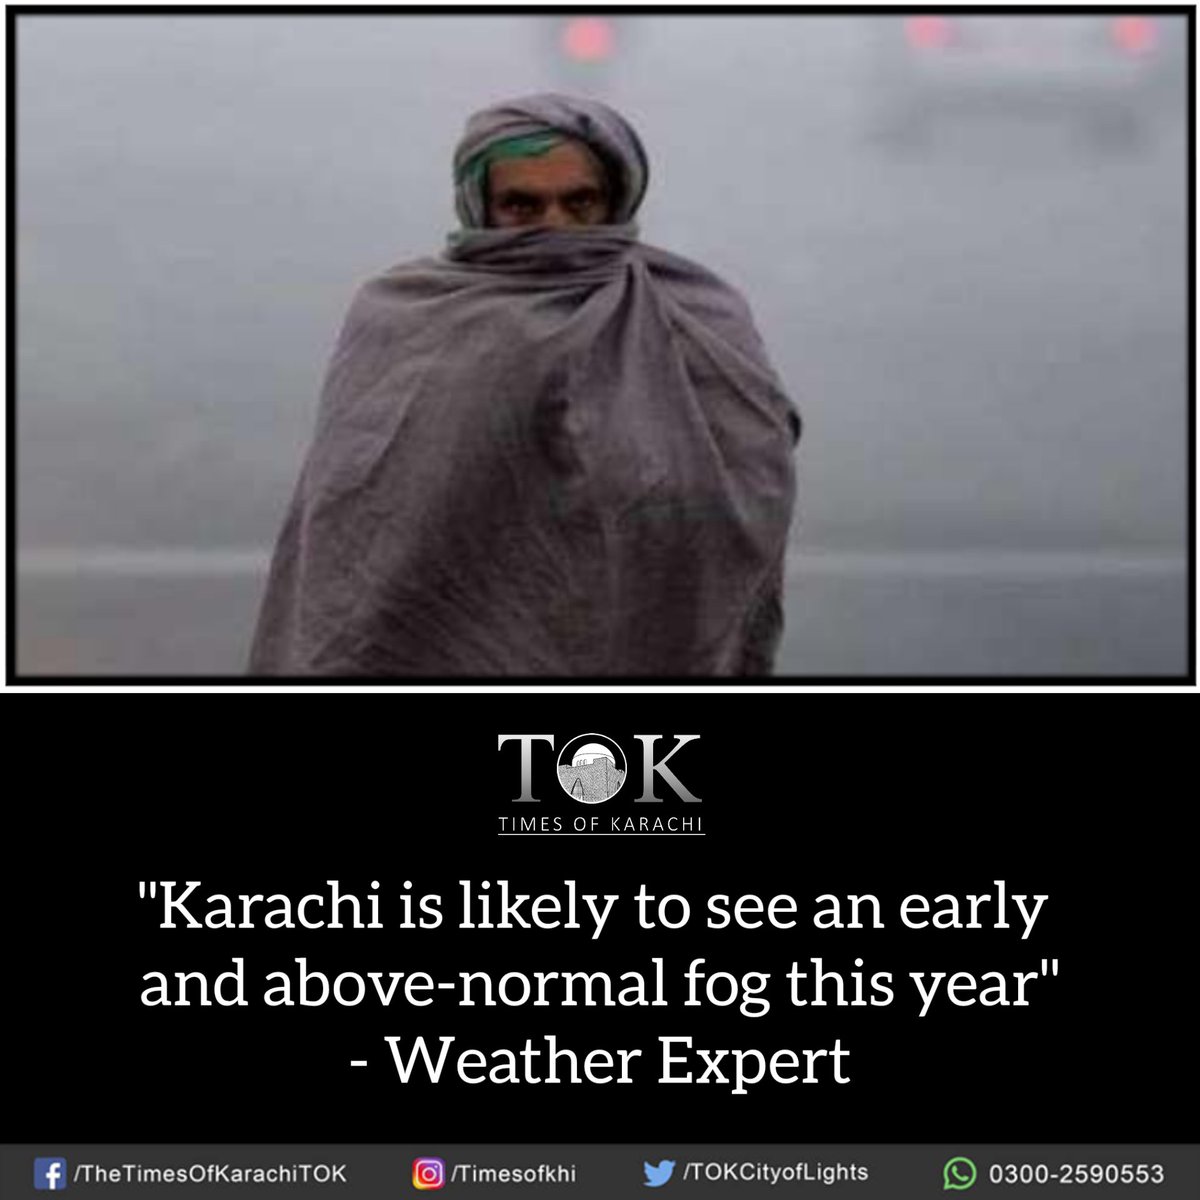 #Karachi is likely to see an early and above-normal fog this year, weather analyst Jawad Memon said. The weather expert further informed that foggy weather will affect visibility more than usual this year across the province. #TOKAlert